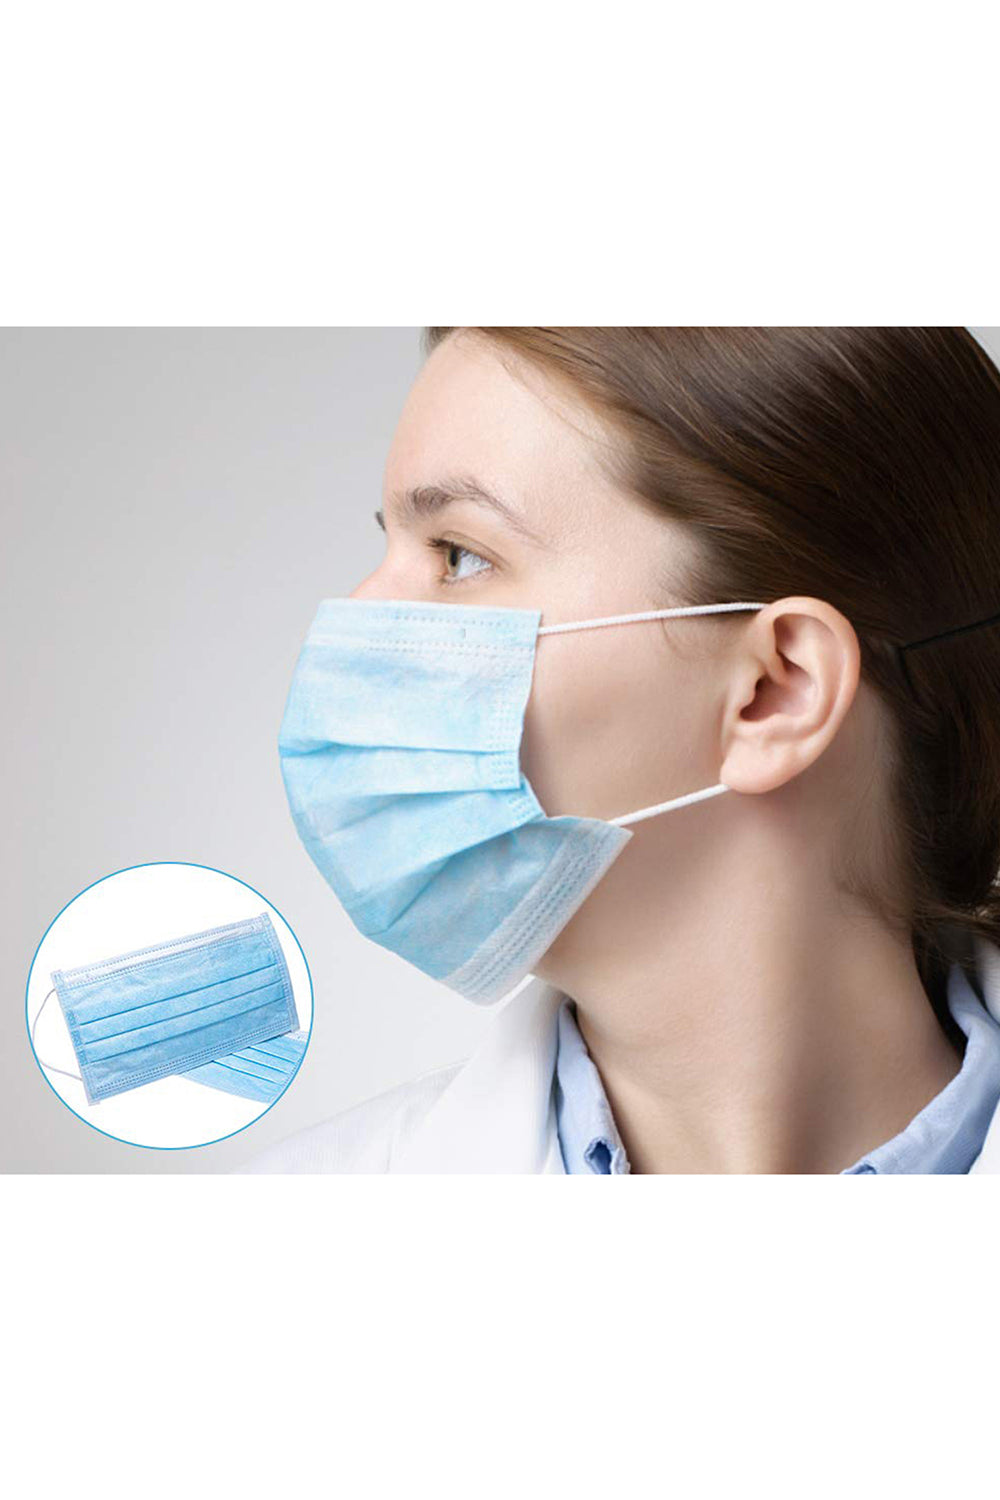 500 Pcs Disposable Face Masks with Elastic Ear Loop 3 Ply for Blocking Dust Air Pollution Protection